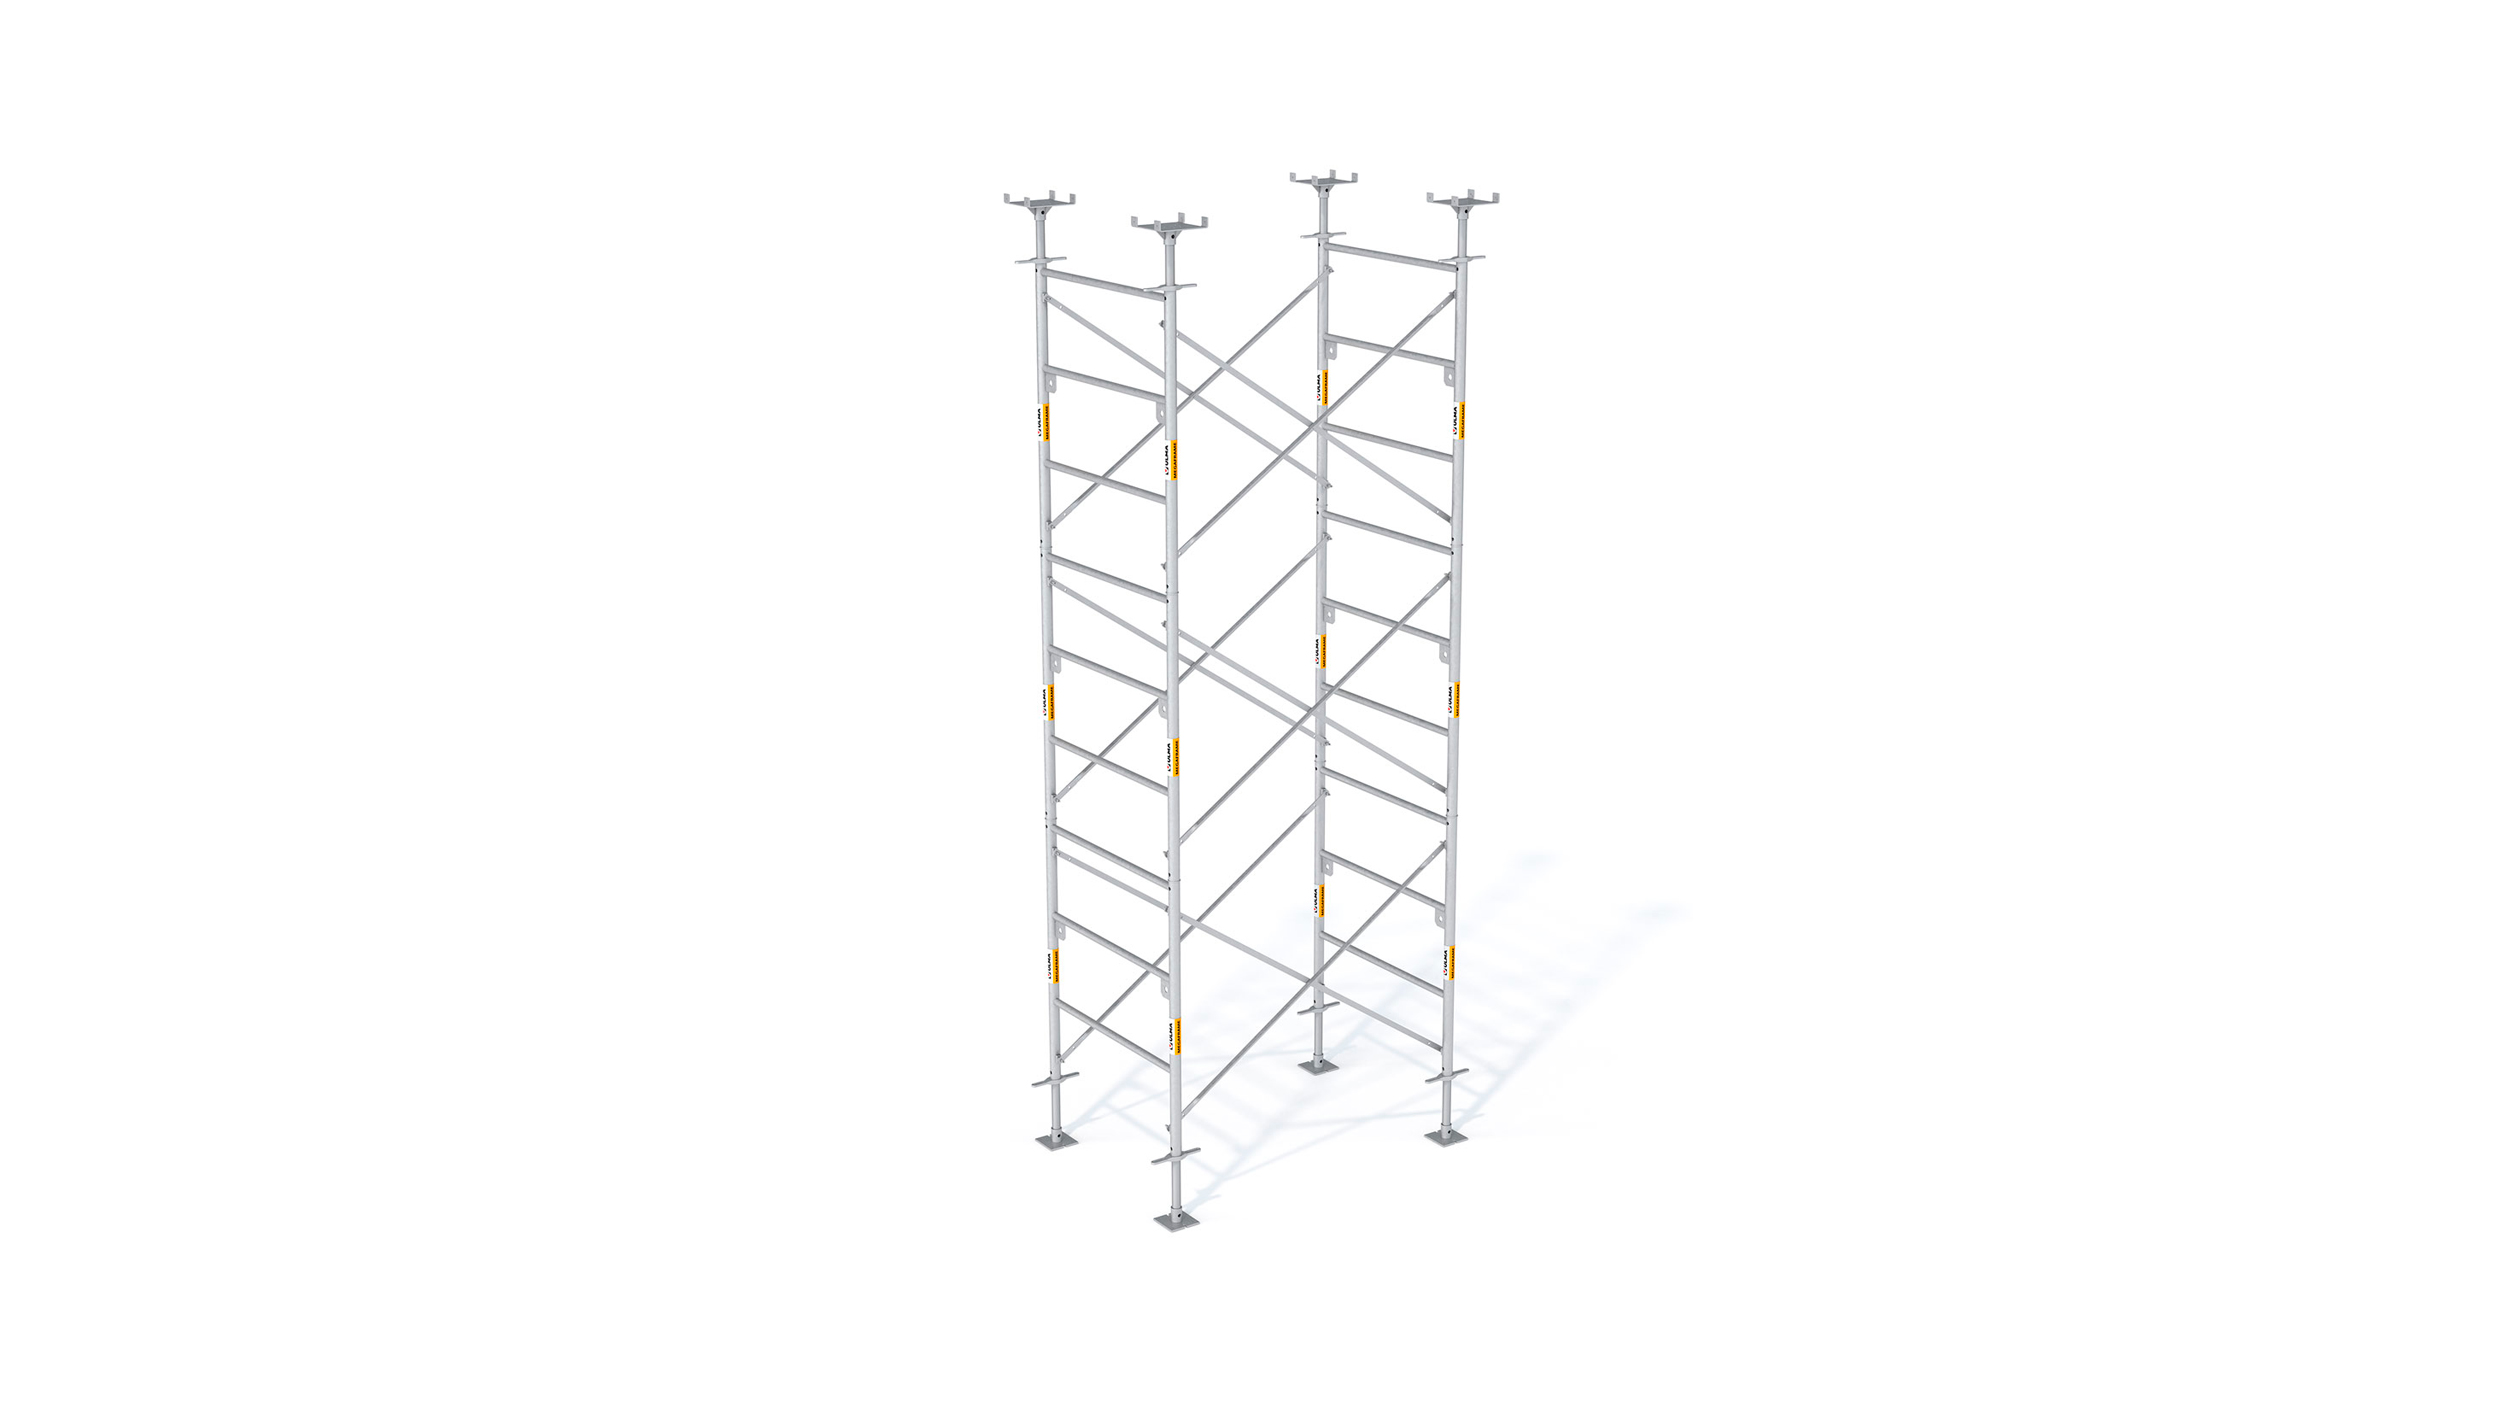 Galvanized steel frame handset shoring system, used on a great variety of construction projects.